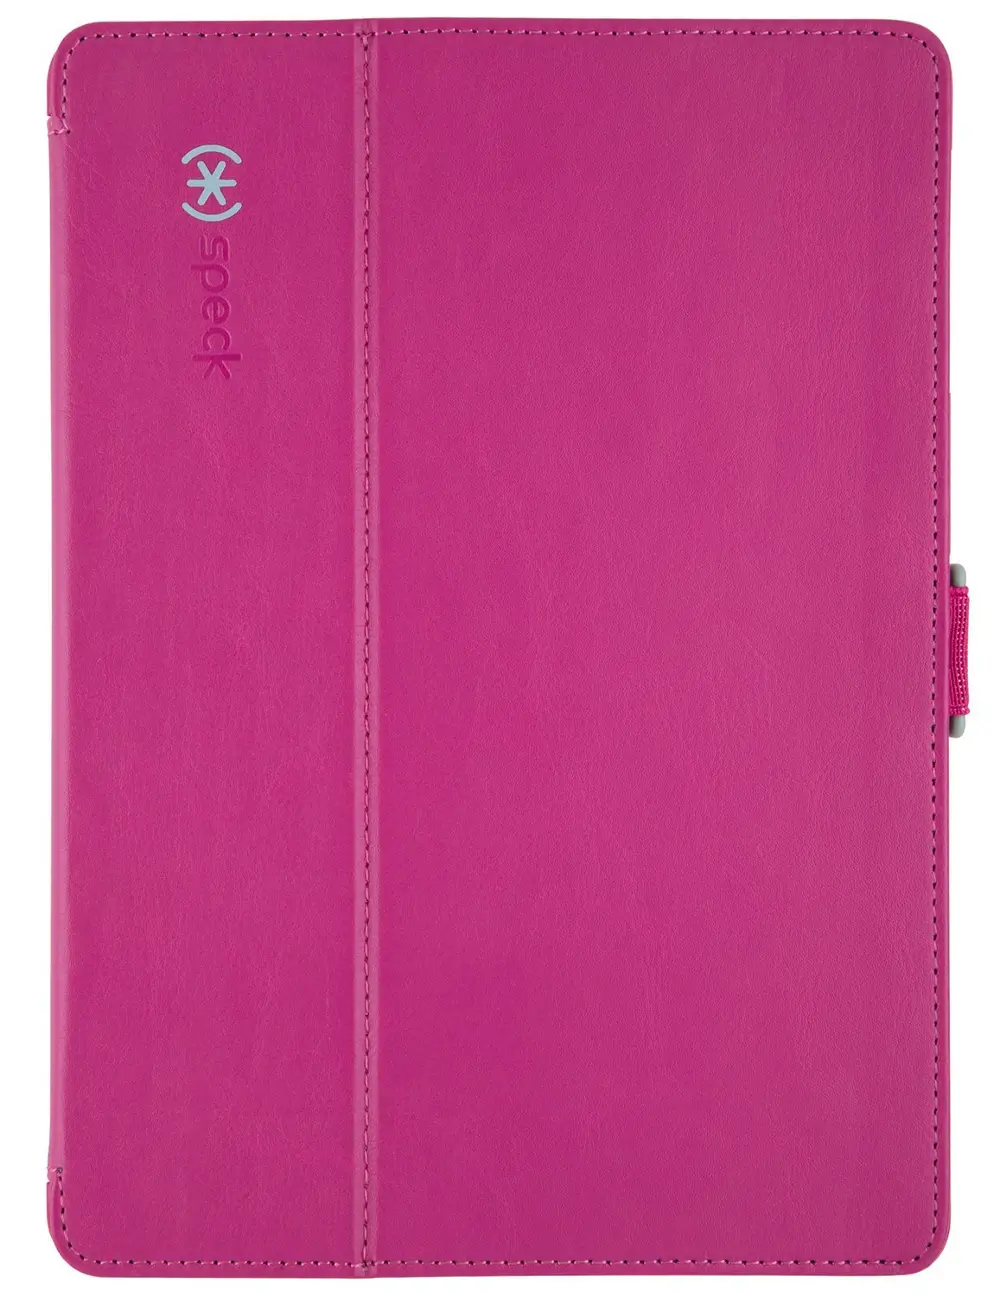 Speck StyleFolio Flip Case Cover for Samsung Galaxy Tab S 10.5  - Pink-1